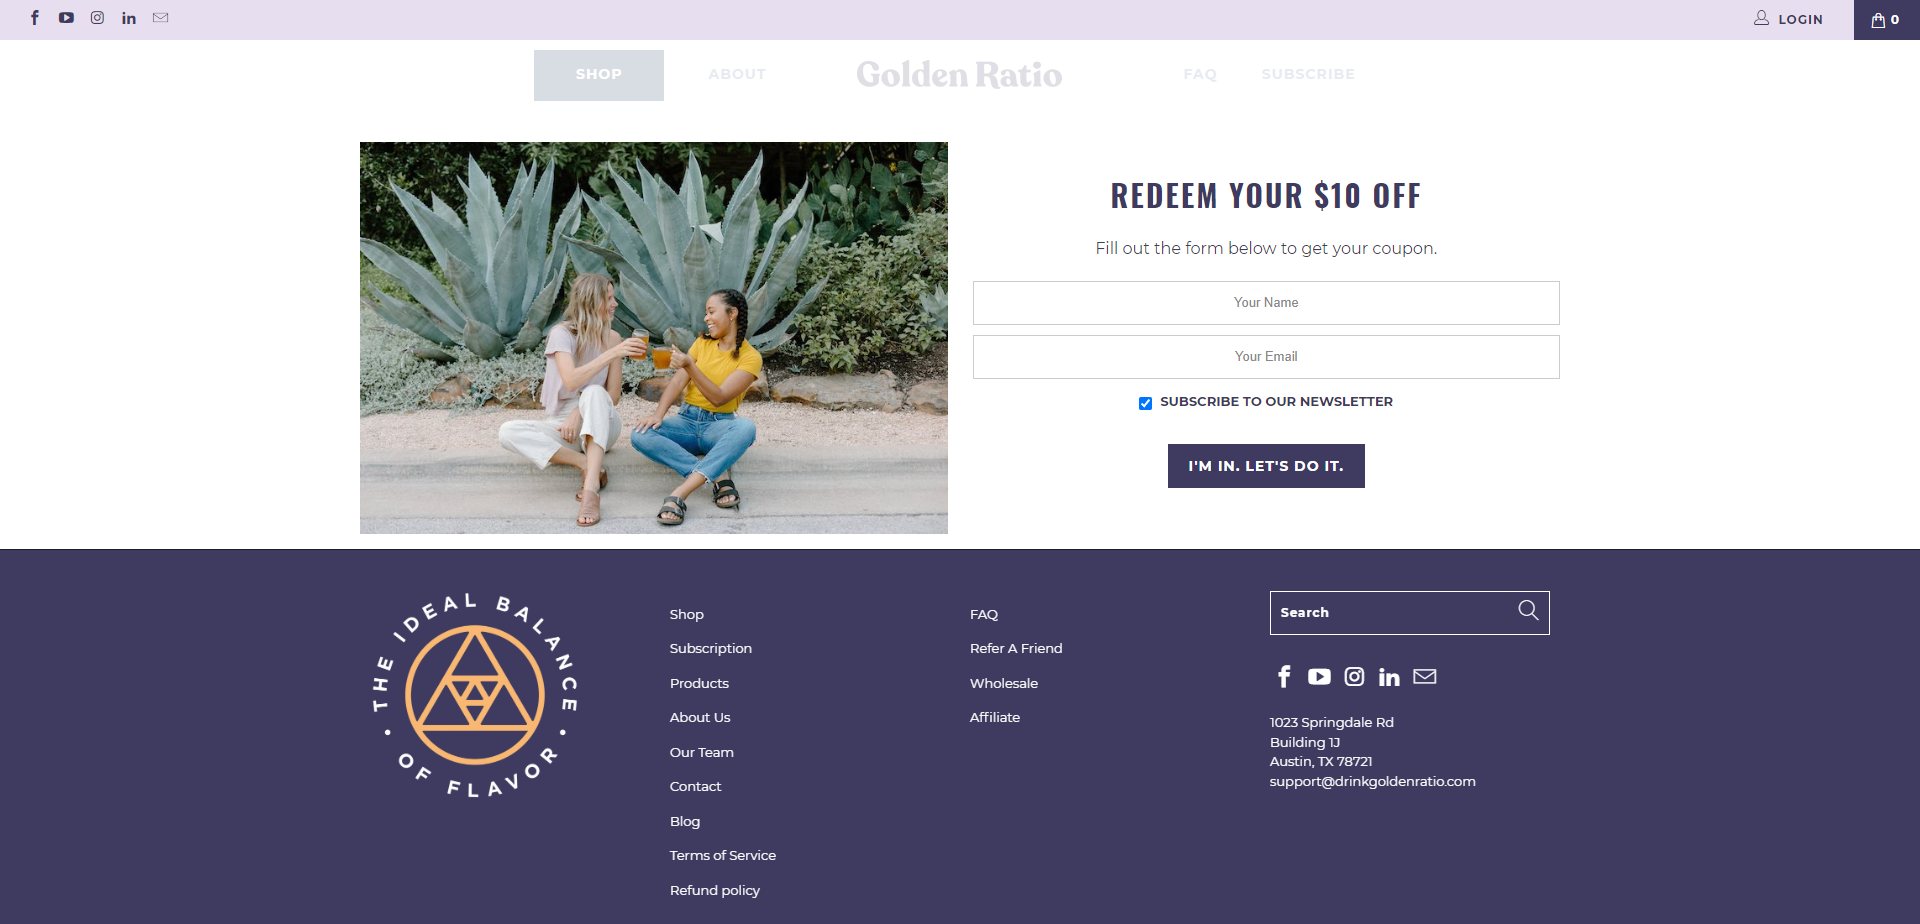 Referral Landing Page for Drink Golden Ratio